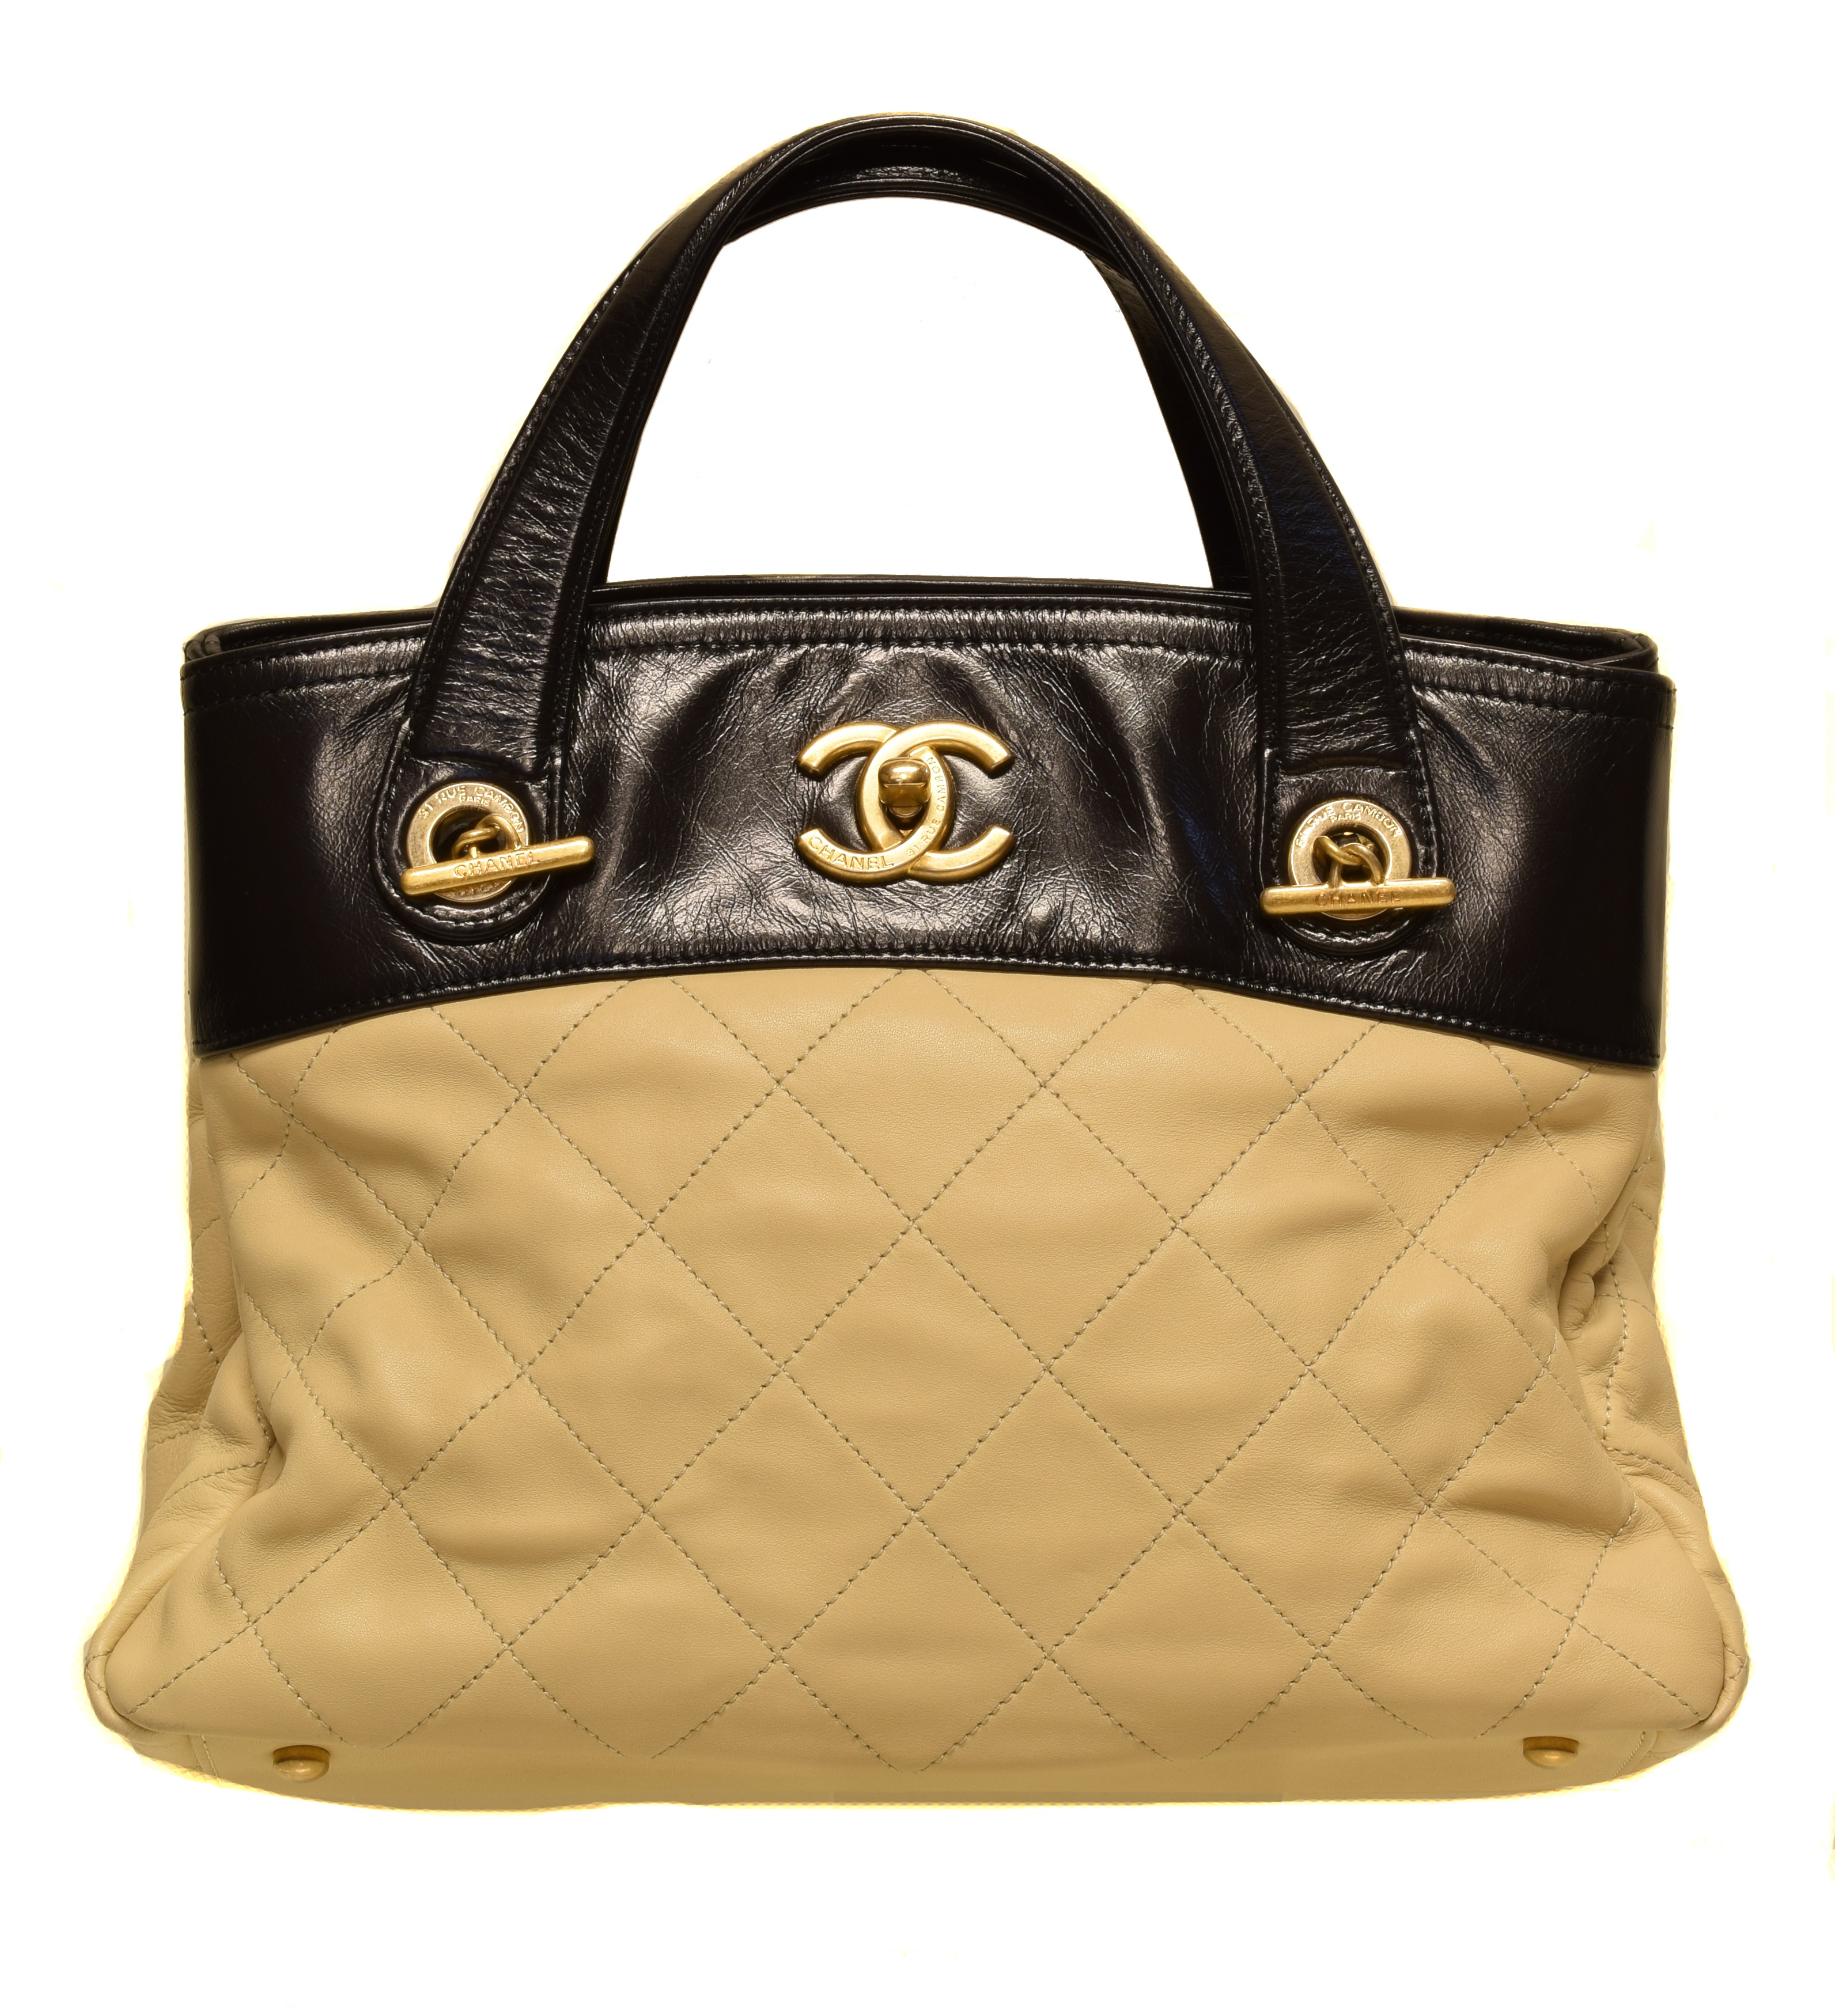 A Chanel In The Mix Shoulder Bag, circa 2012-3, the beige quilted calf leather exterior with smooth black leather detailing, gold tone hardware, interlace chain and black leather strap, serial no. 17422353. With maker's authenticity card and dust bag.